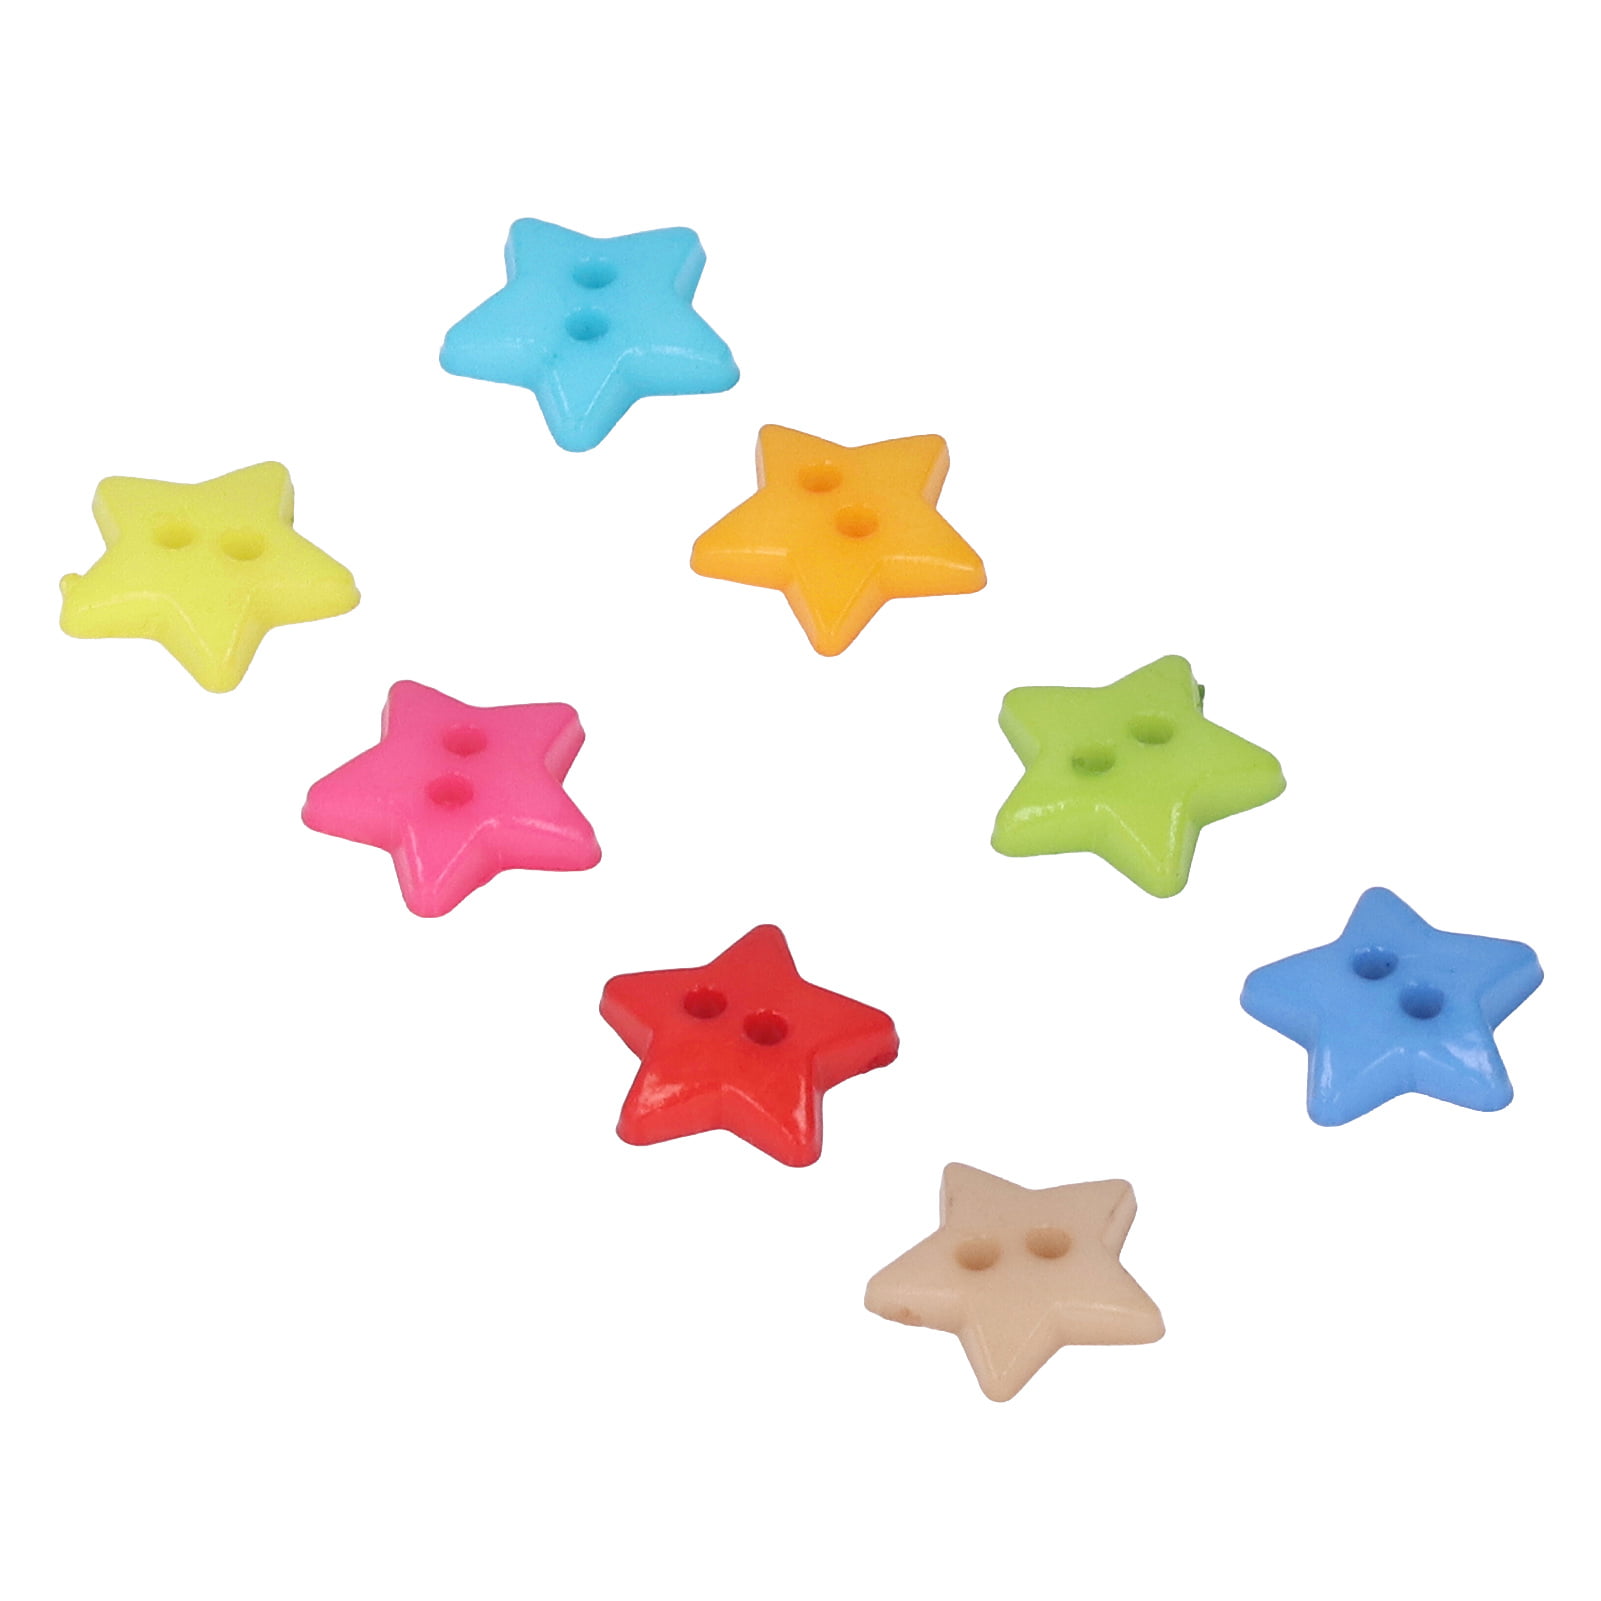  Star Buttons for Crafts, 200Pcs Colorful Star Shaped Decorative  Buttons Sewing Button DIY Button for Clothes Scrapbooking Decoration